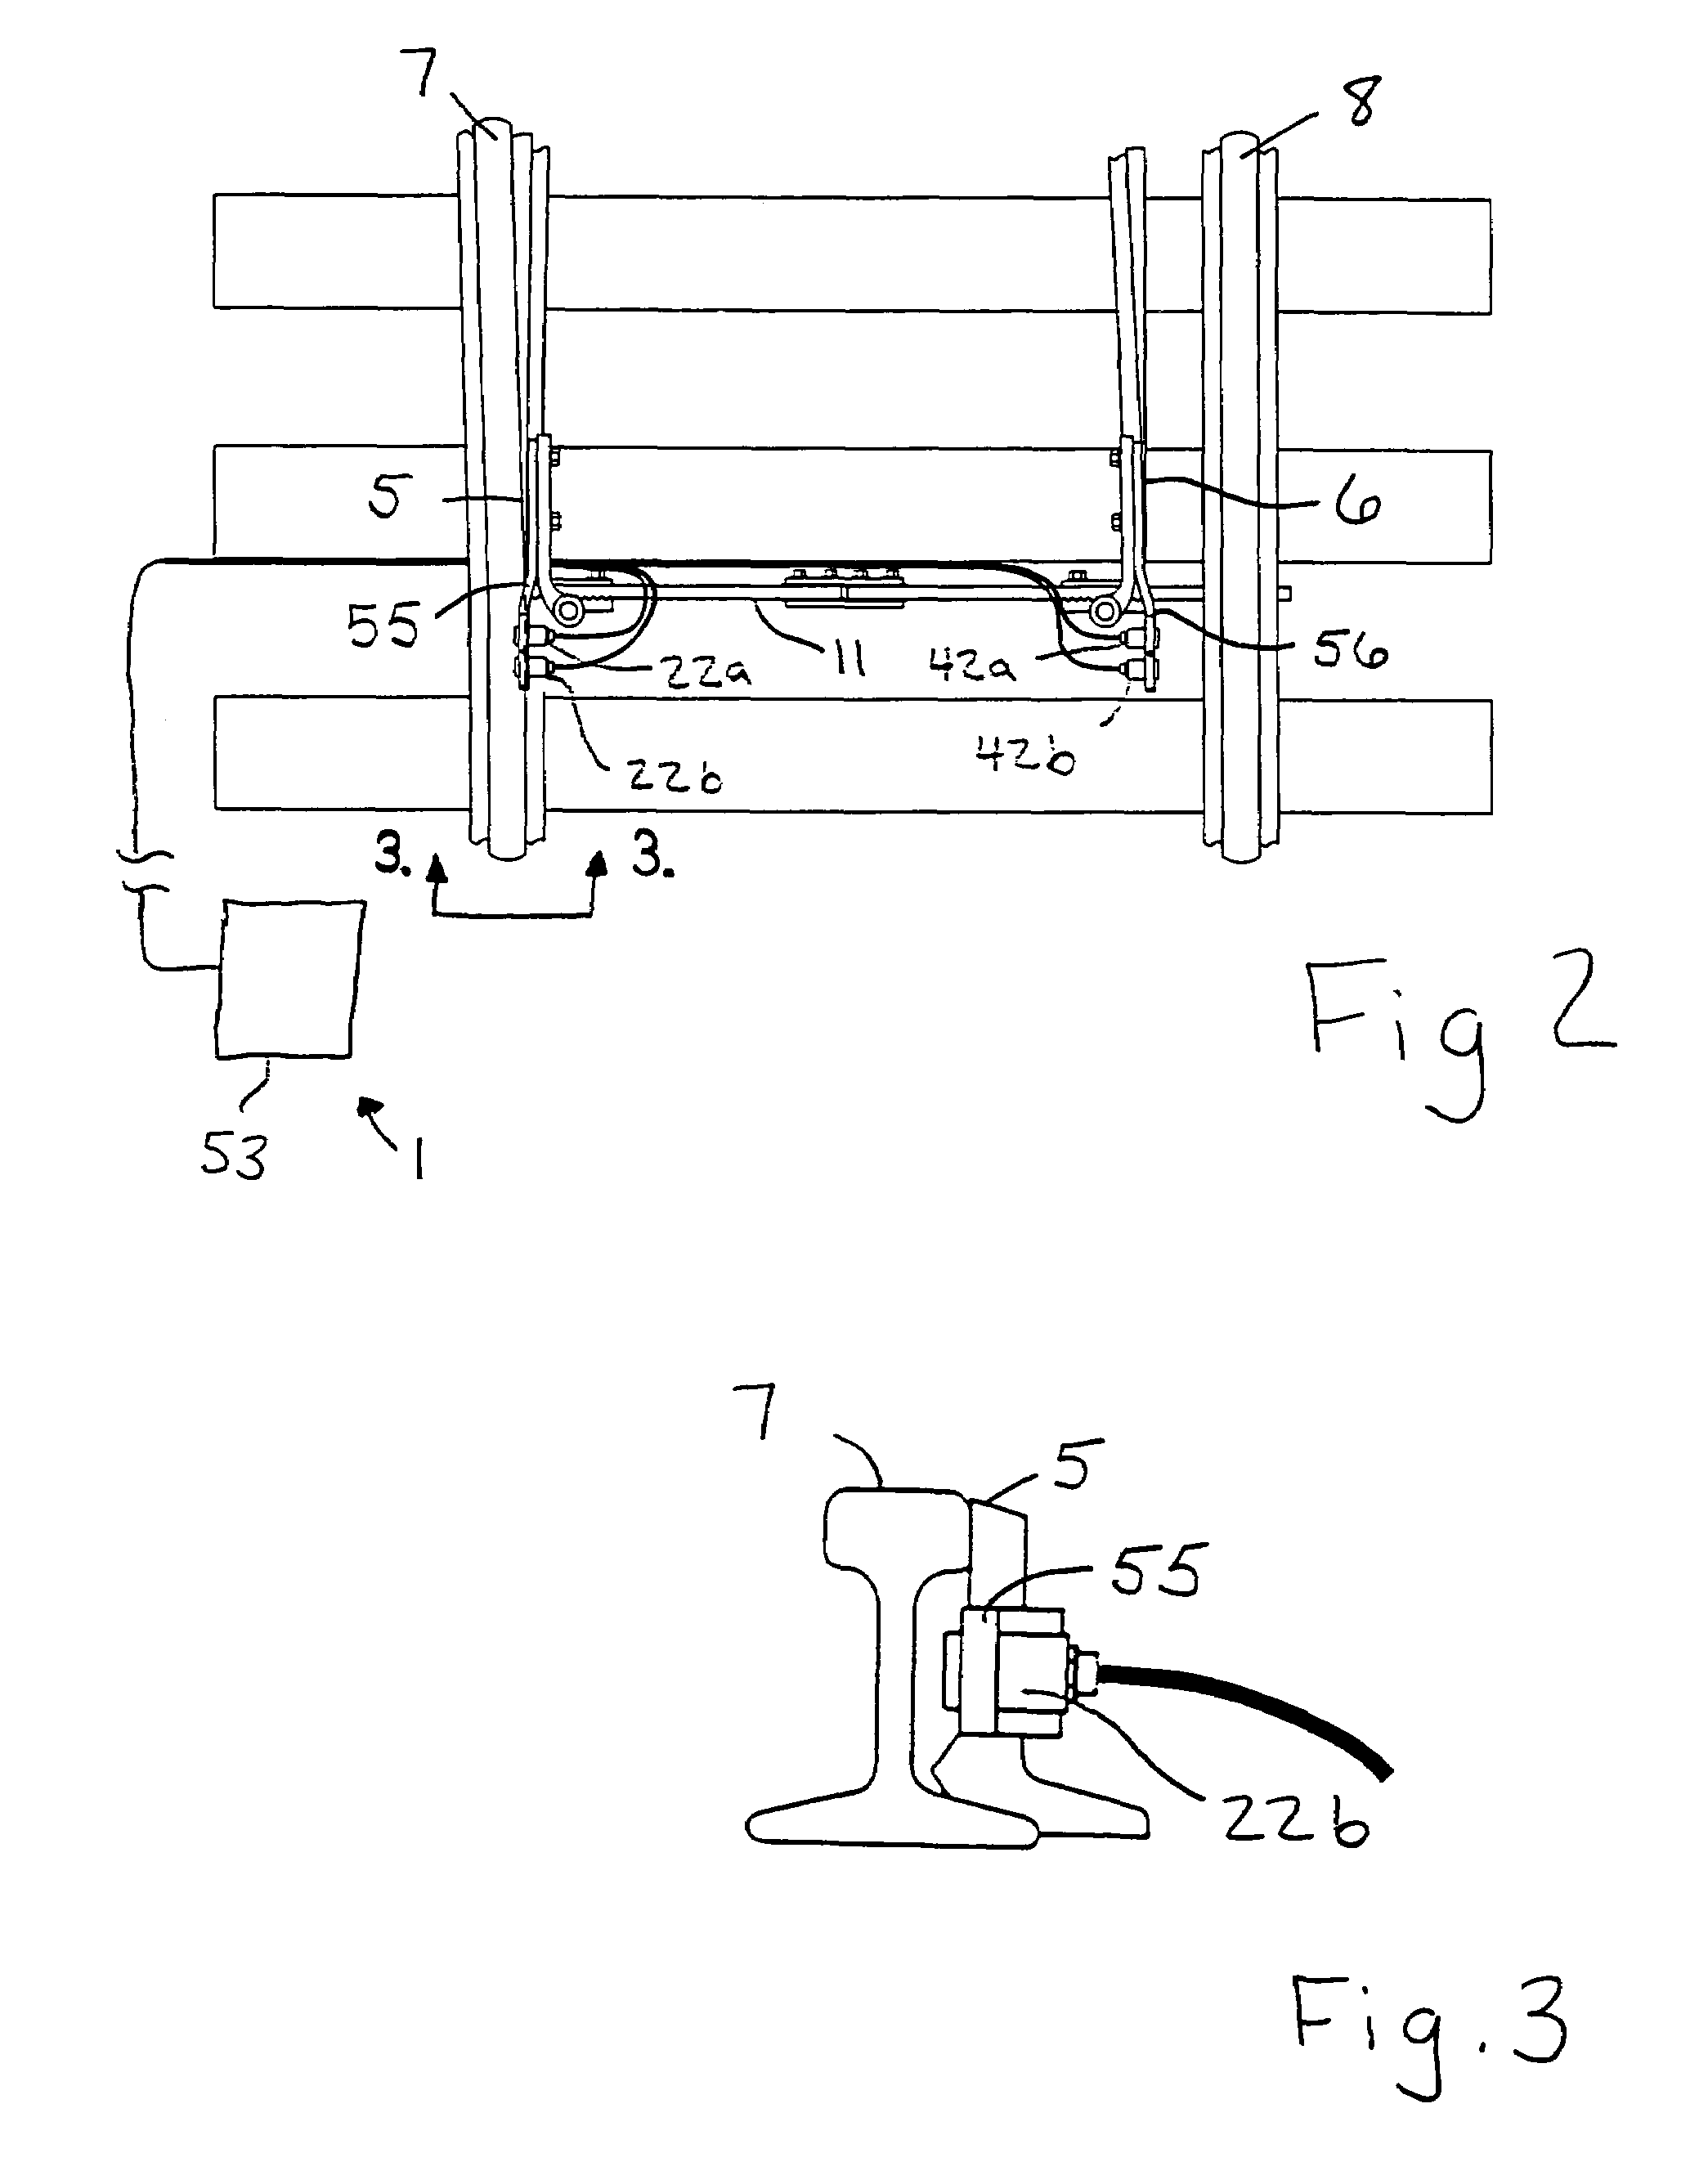 Proximity detection and communication mechanism and method